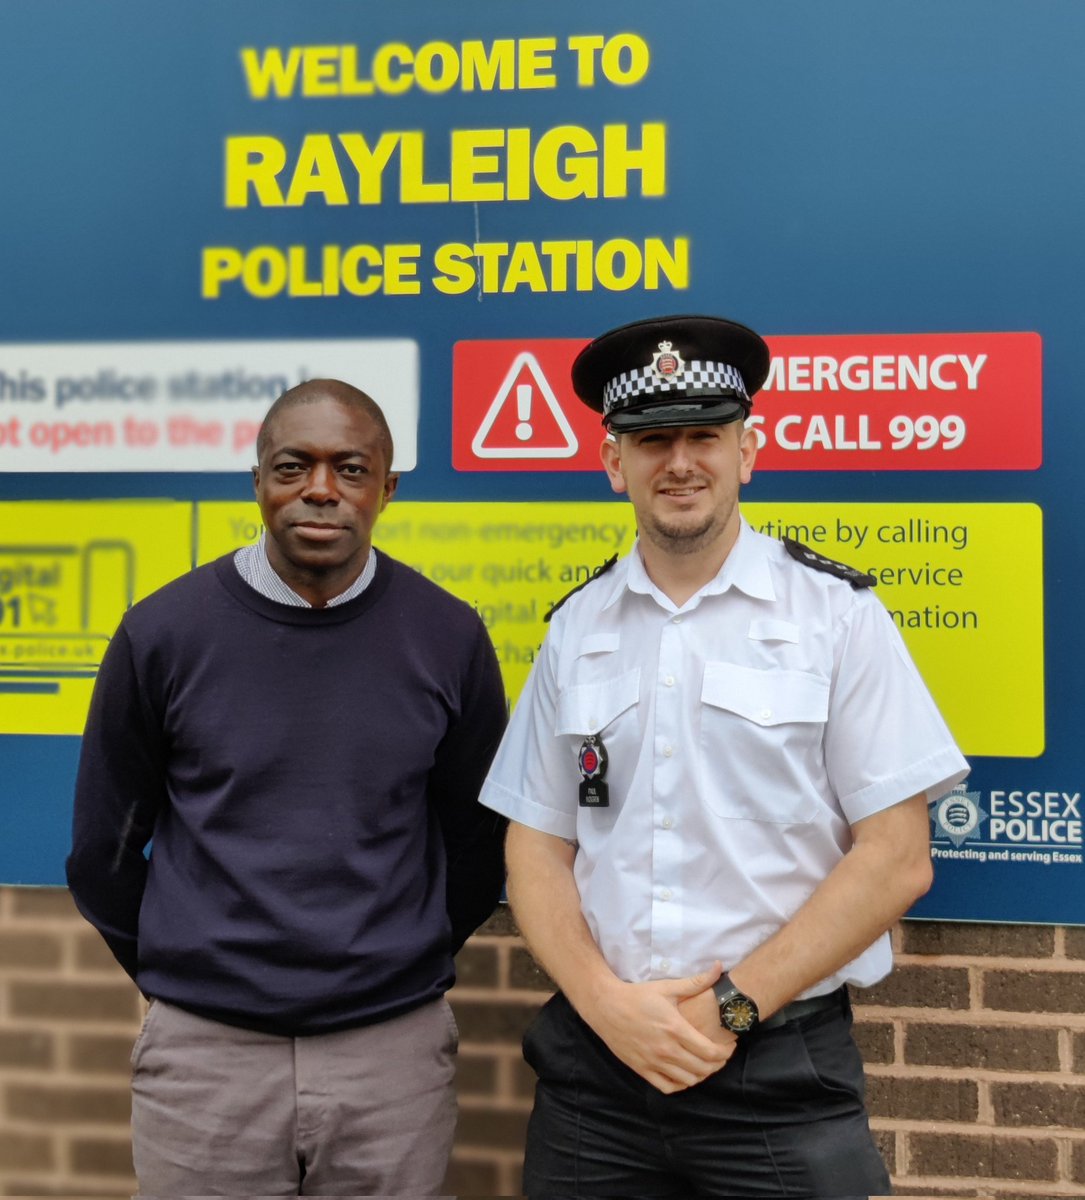 I met with Chief Inspector Paul Hogben, Rochford District borough commander to discuss operations, crime and community engagement. All of these issues have come up on the doorstep, and are key concerns of residents. #backbayo #thechangeweneed